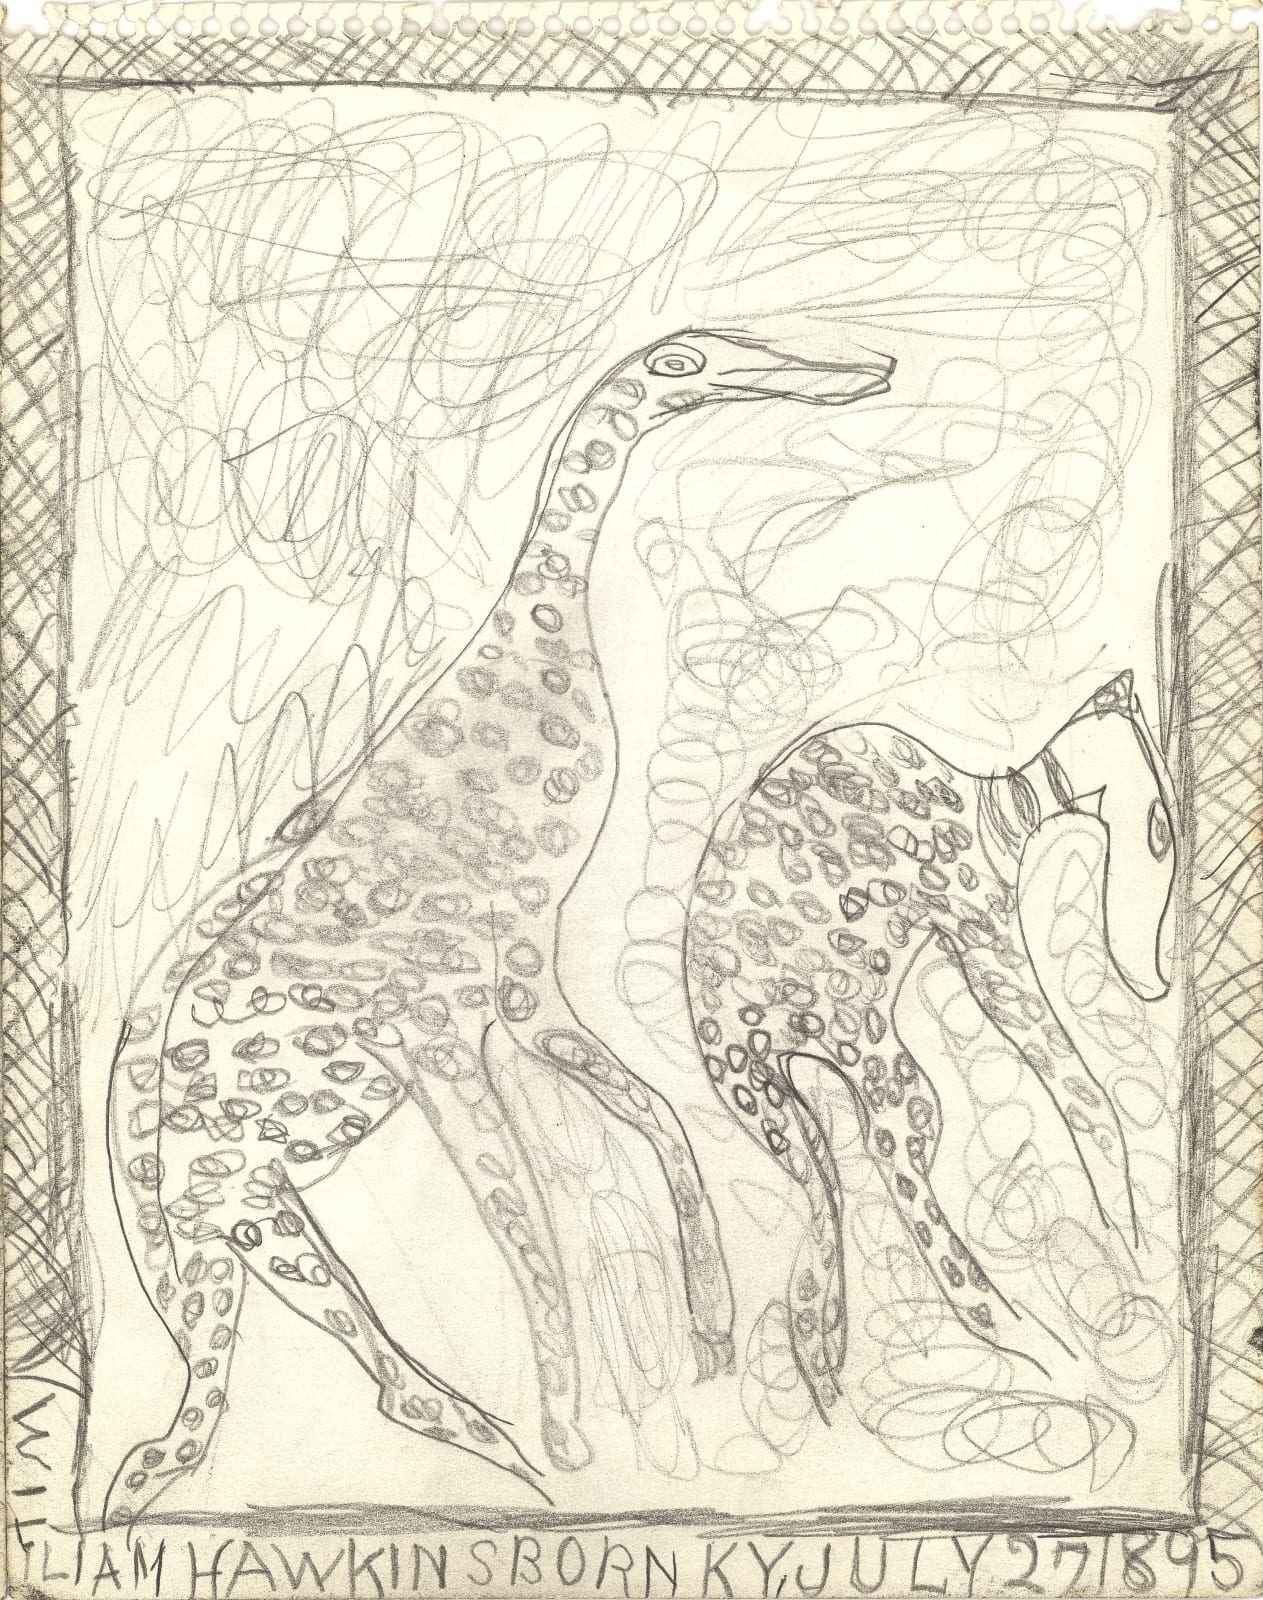 Two Giraffes Graphite on paper 14 x 11 in. (35.6 x 27.9 cm) (WH 439)